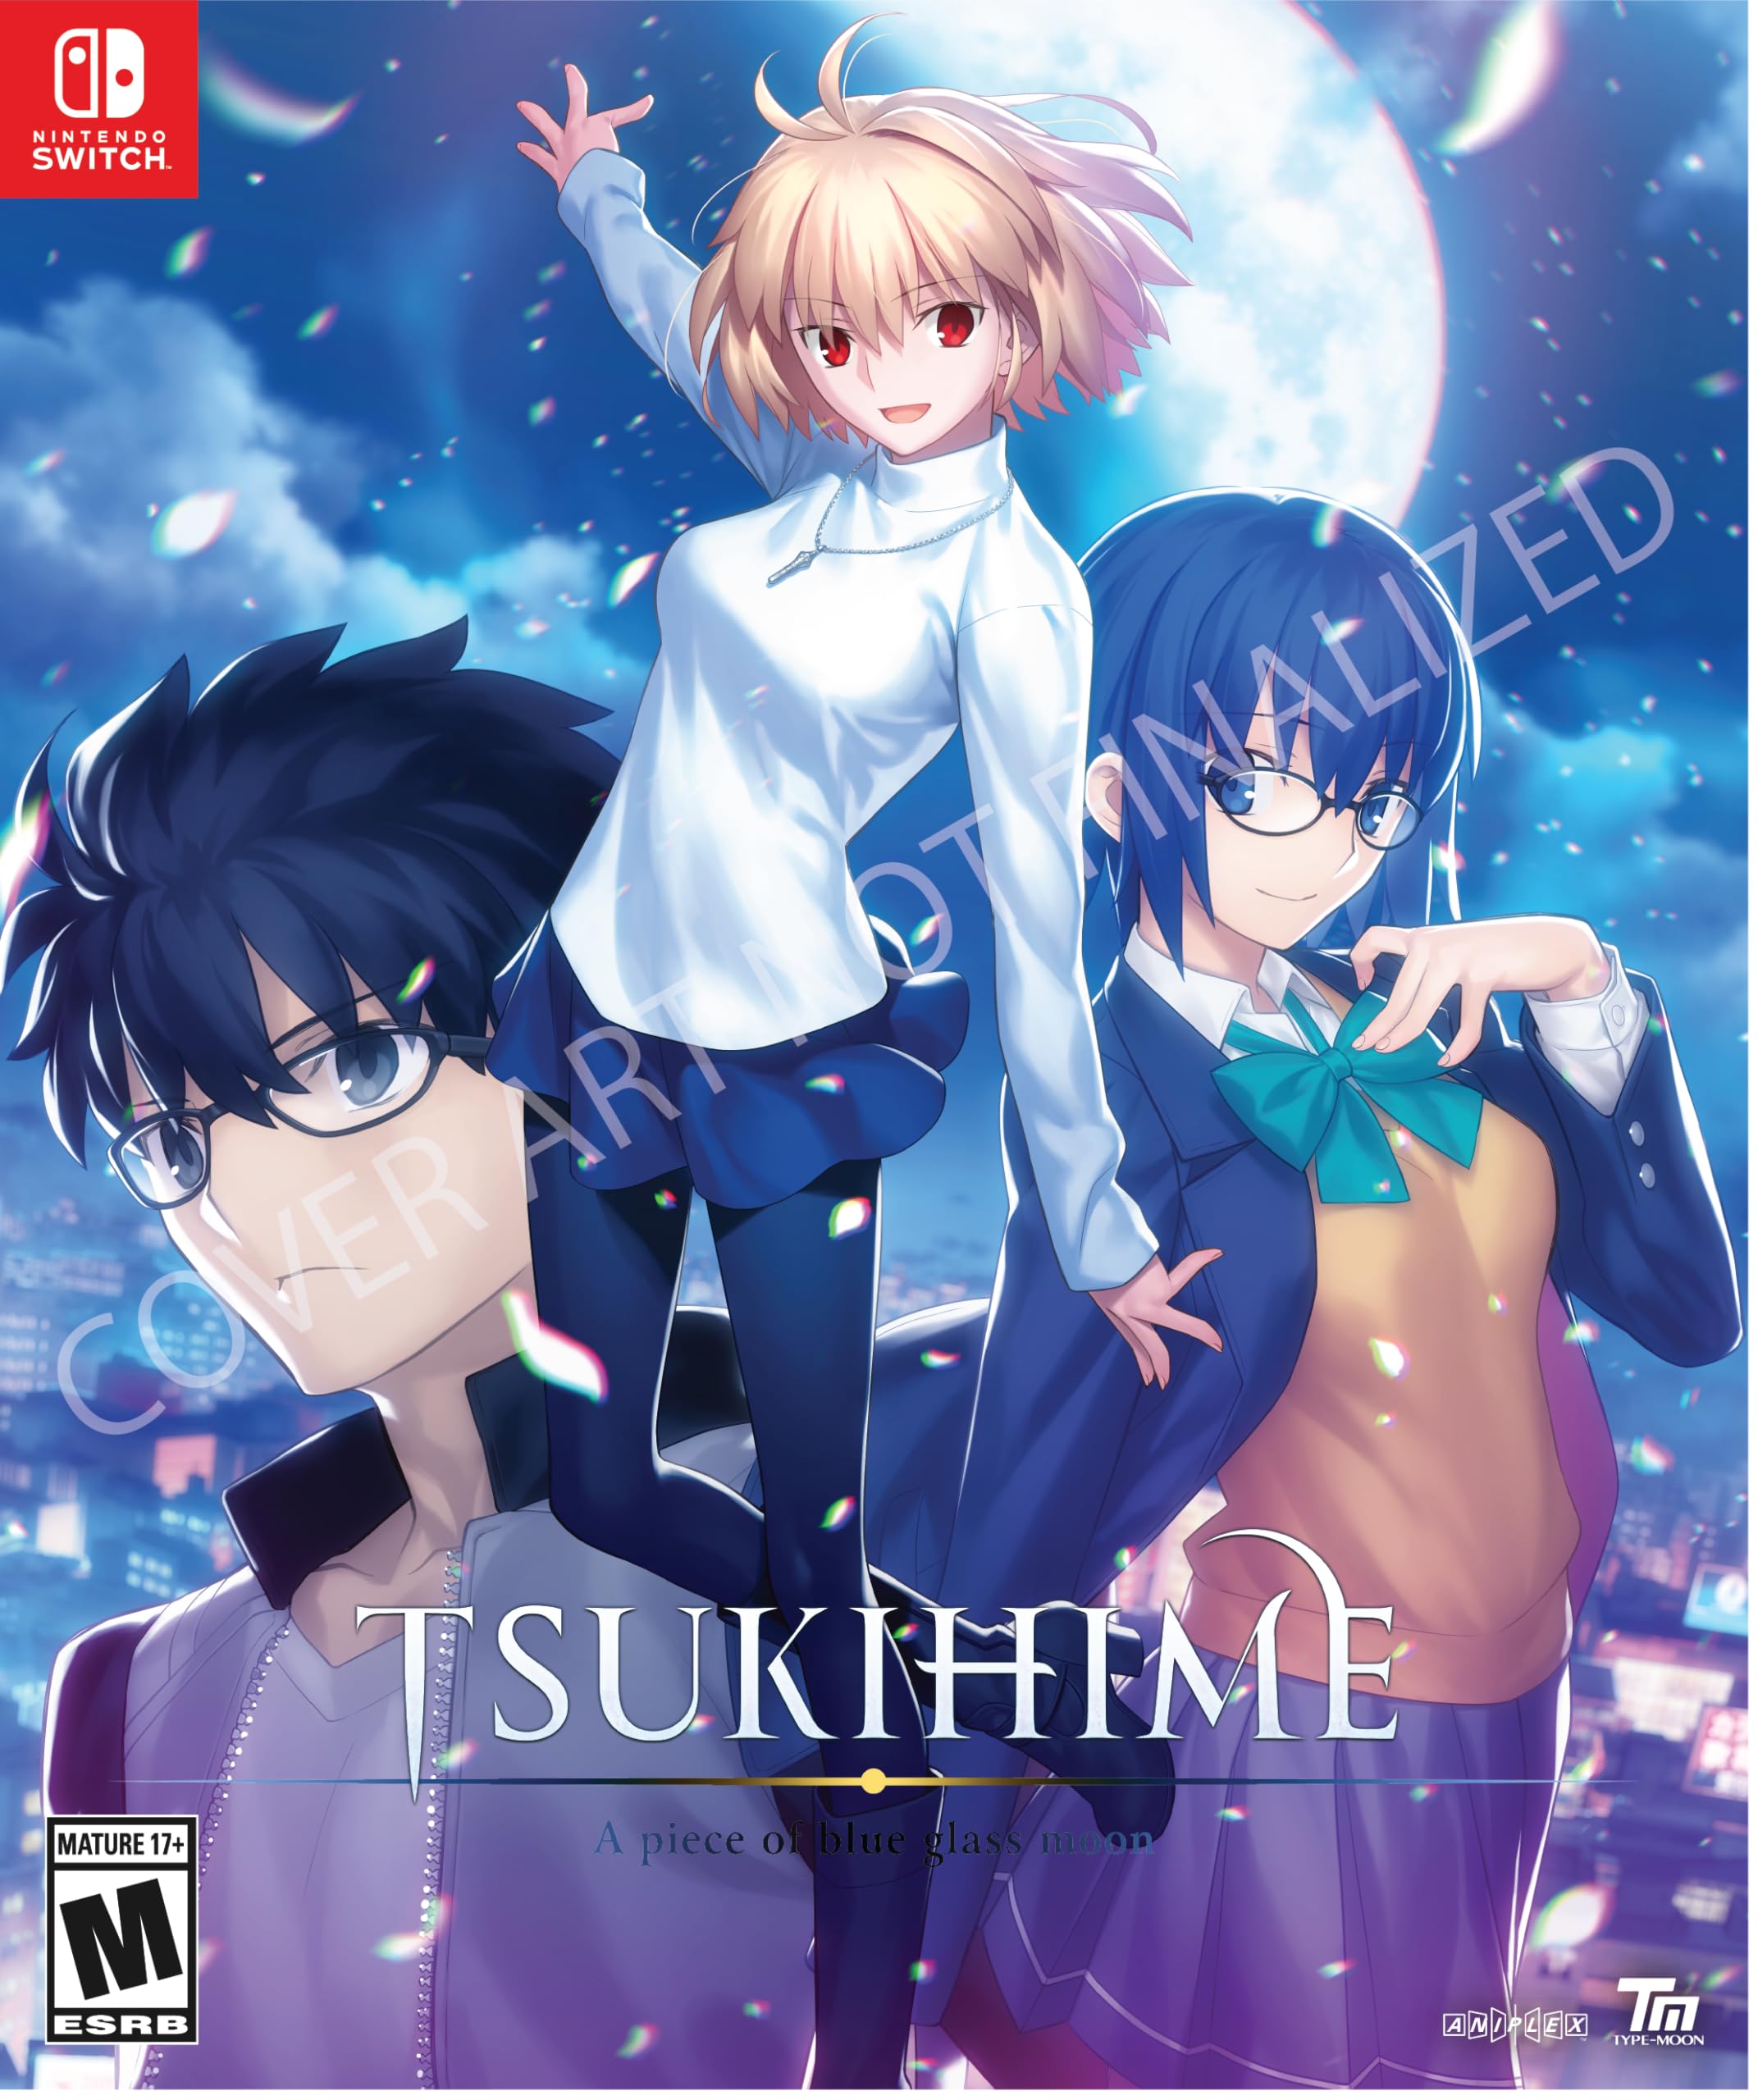 TSUKIHIME: A piece of blue glass moon: Limited Edition - Nintendo Switch